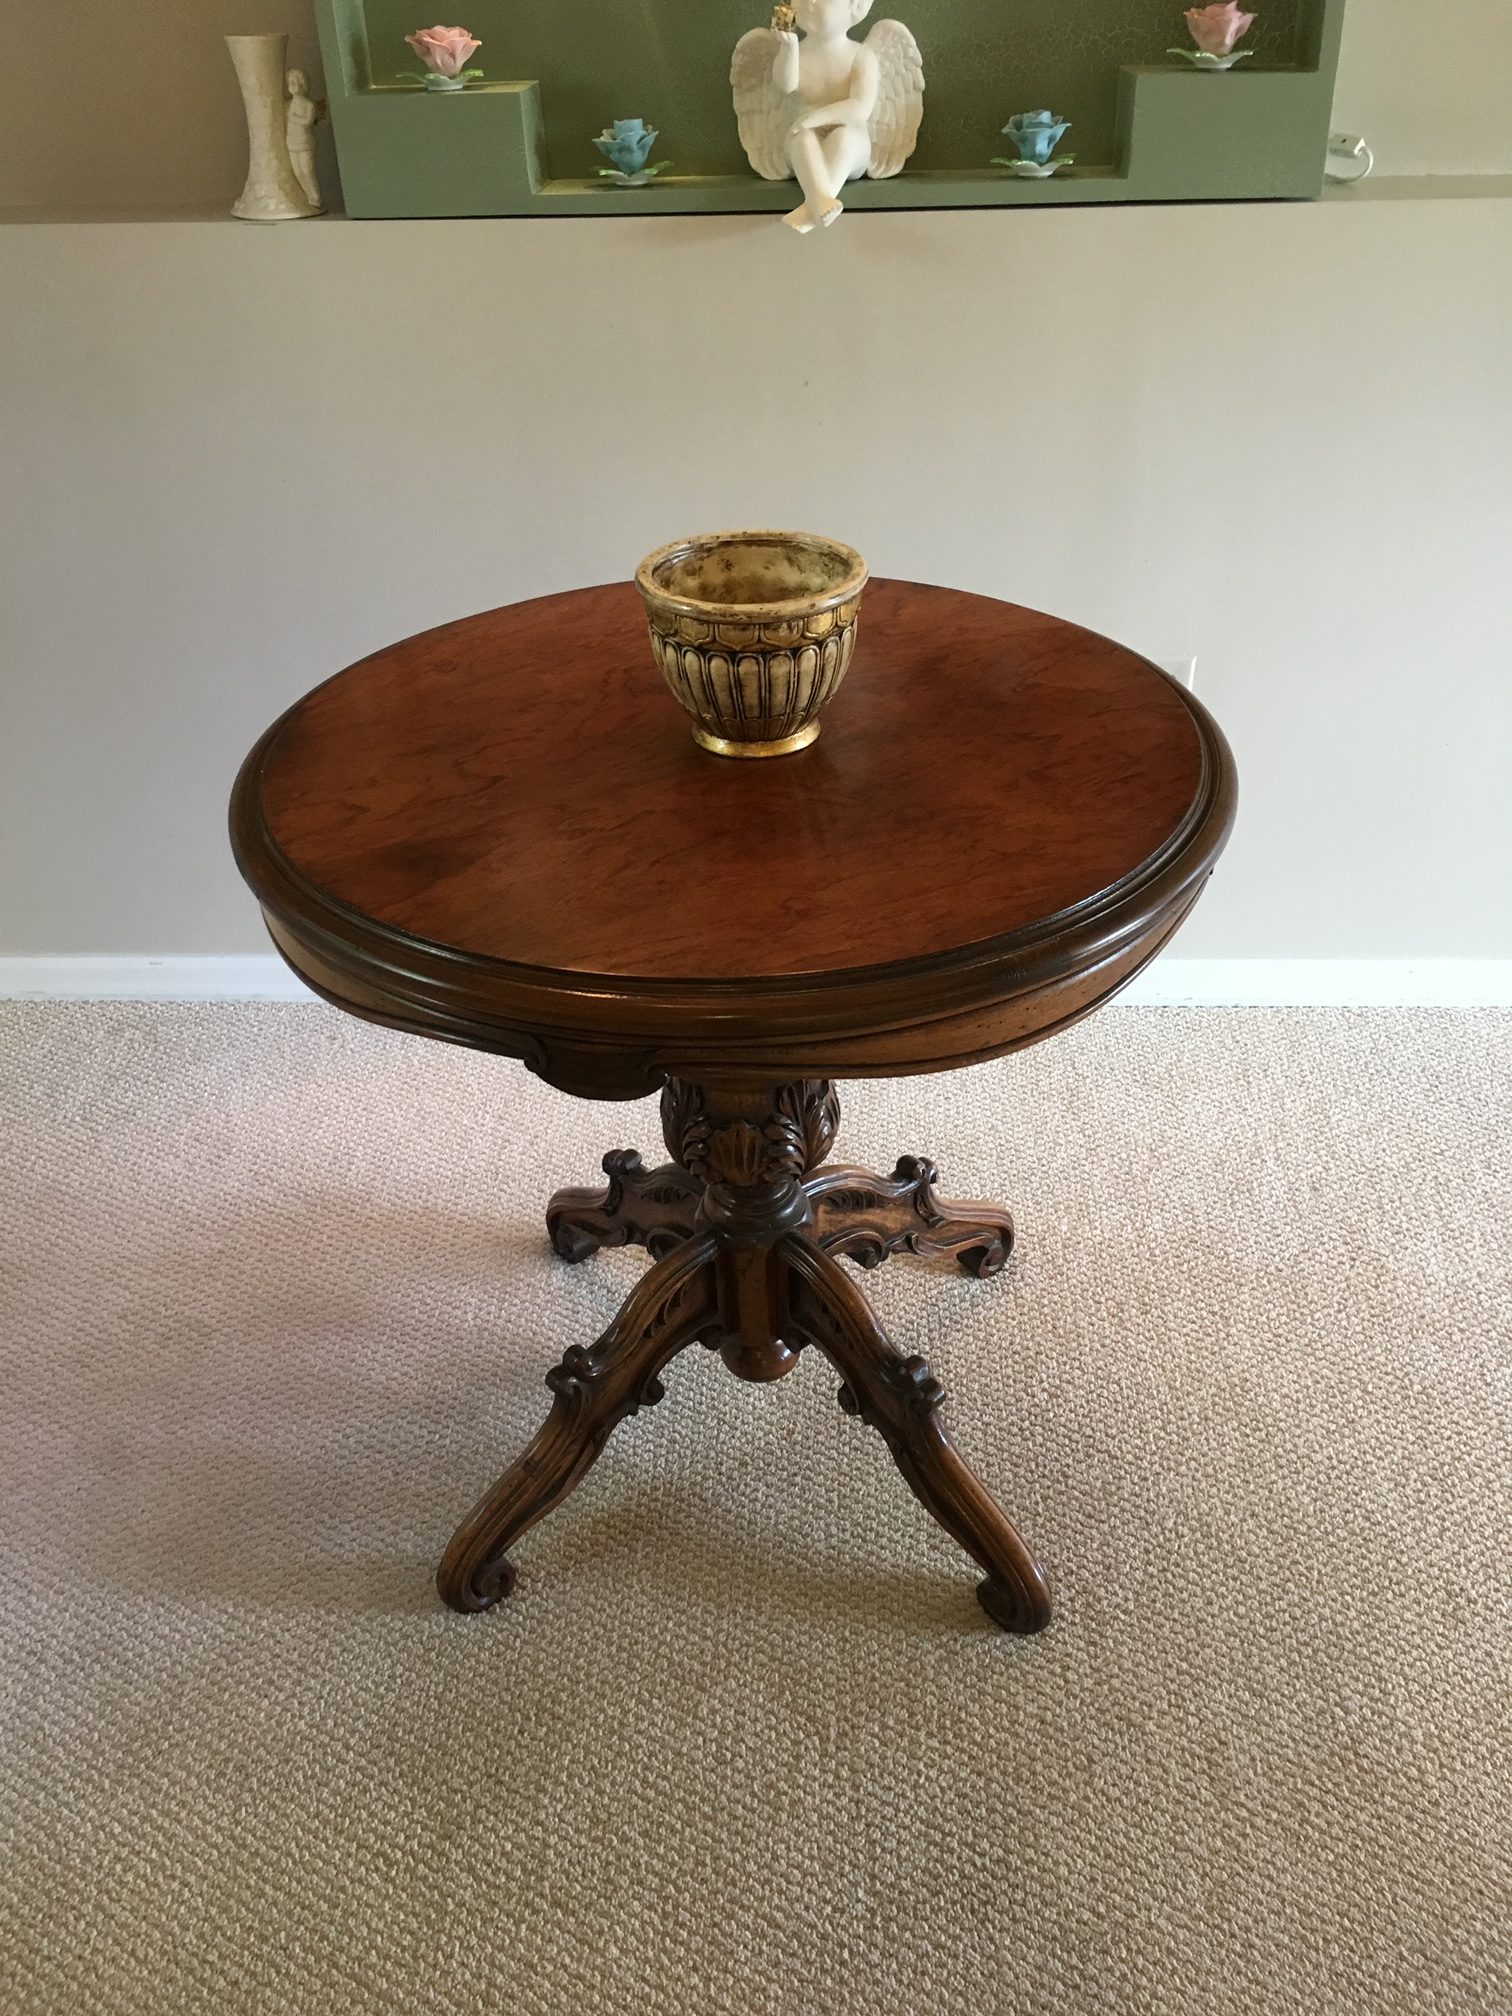 Round Pedestal Table - AM Furniture in Surrey, New Westminster, Burnaby, Vancouver, Coquitlam